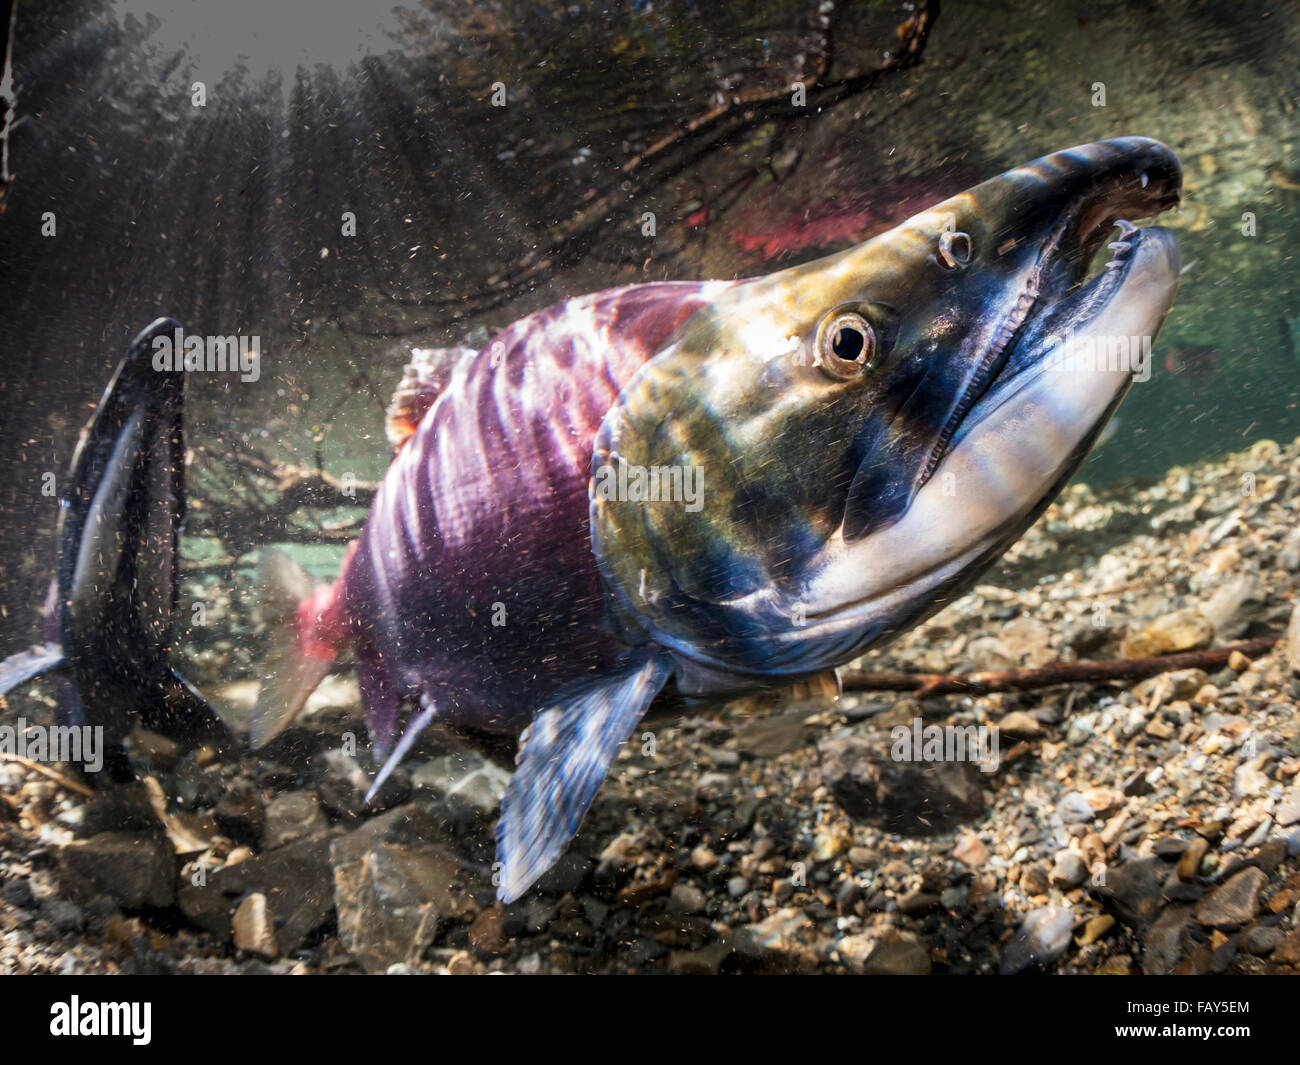 Male Sockeye . A male spawning sockeye salmon on a rocky beach. Male sockeye  develop a pronounced hump and hook-like nose in the lead up to spawning  Stock Photo - Alamy